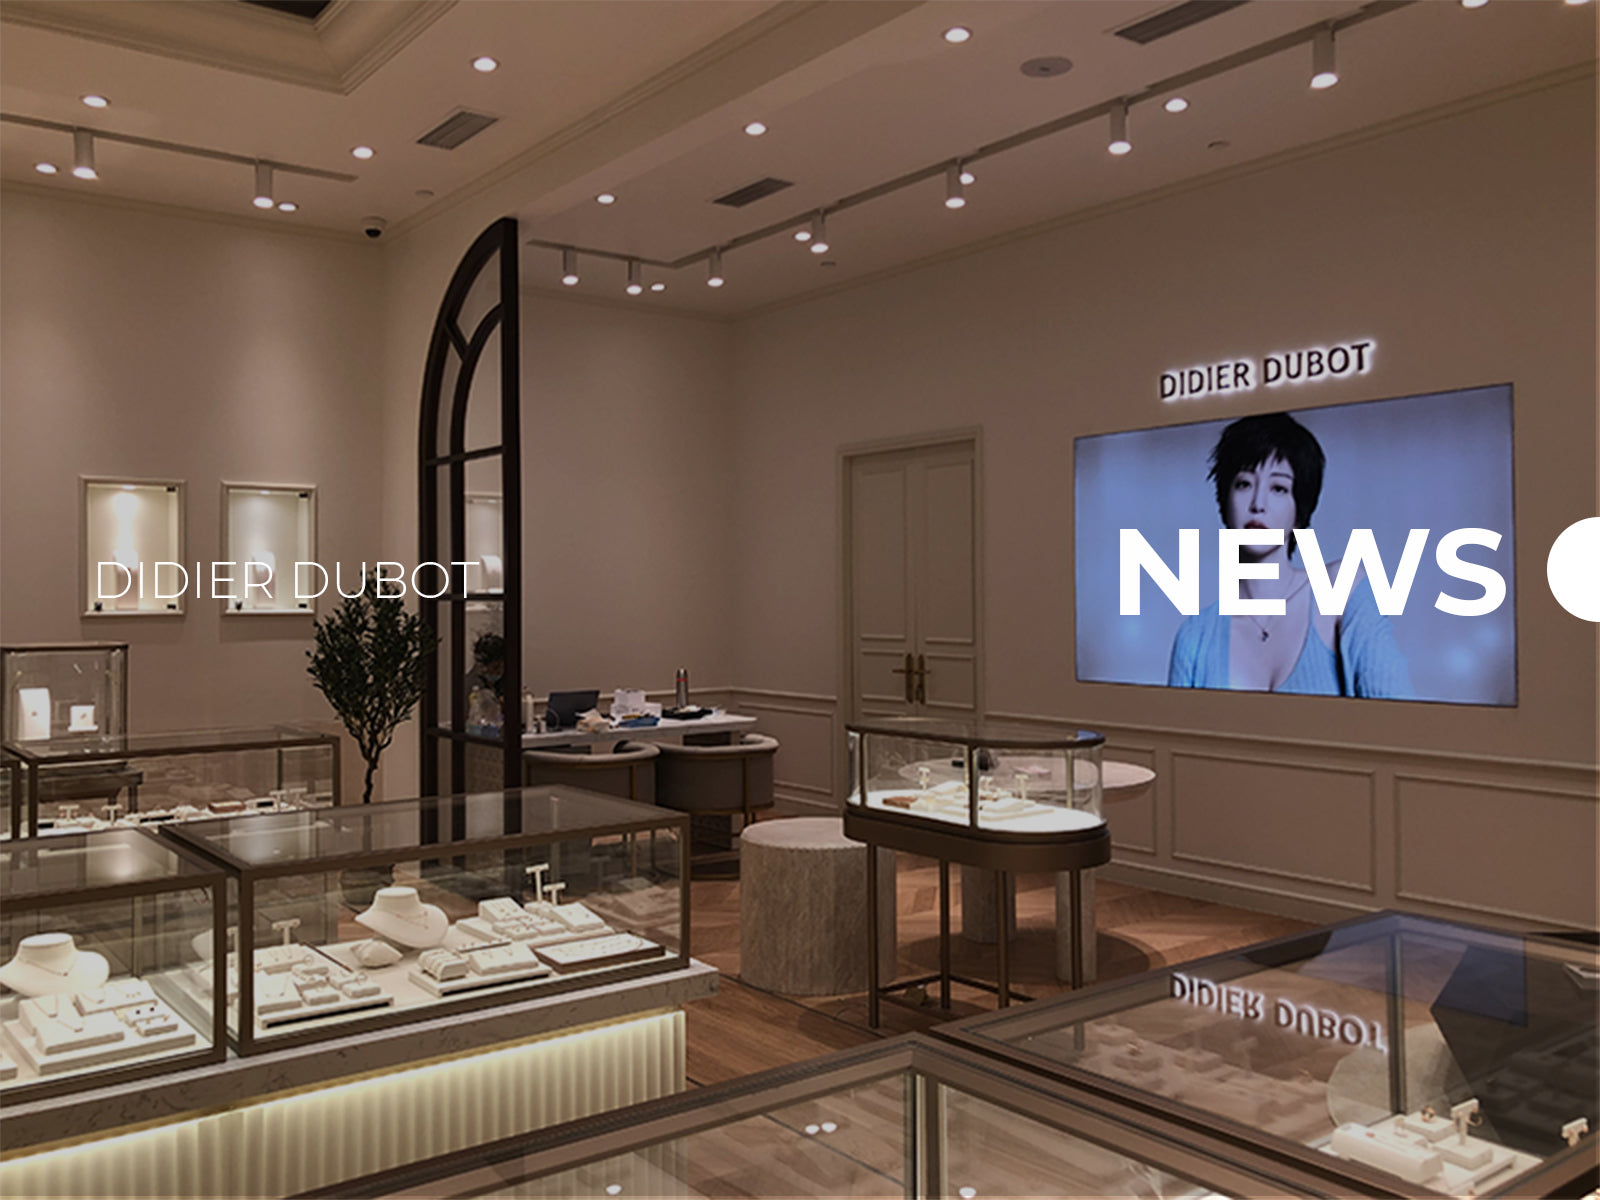 New DIDIER DUBOT Store Opening in China